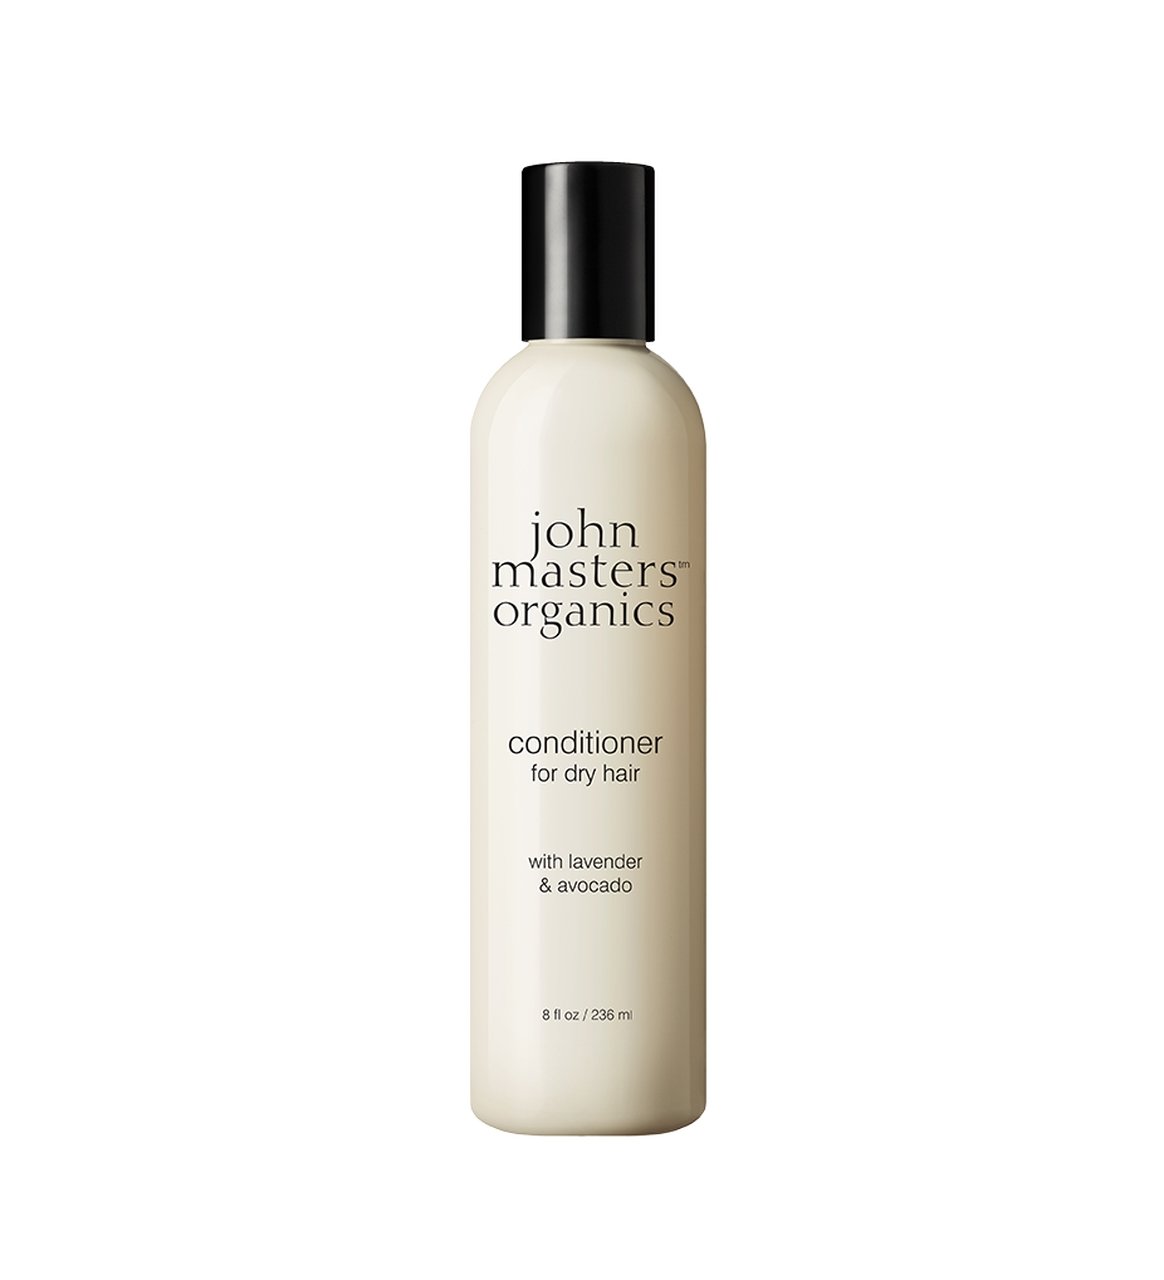 Lavender & Avocado Conditioner for Dry Hair by John Masters Organic